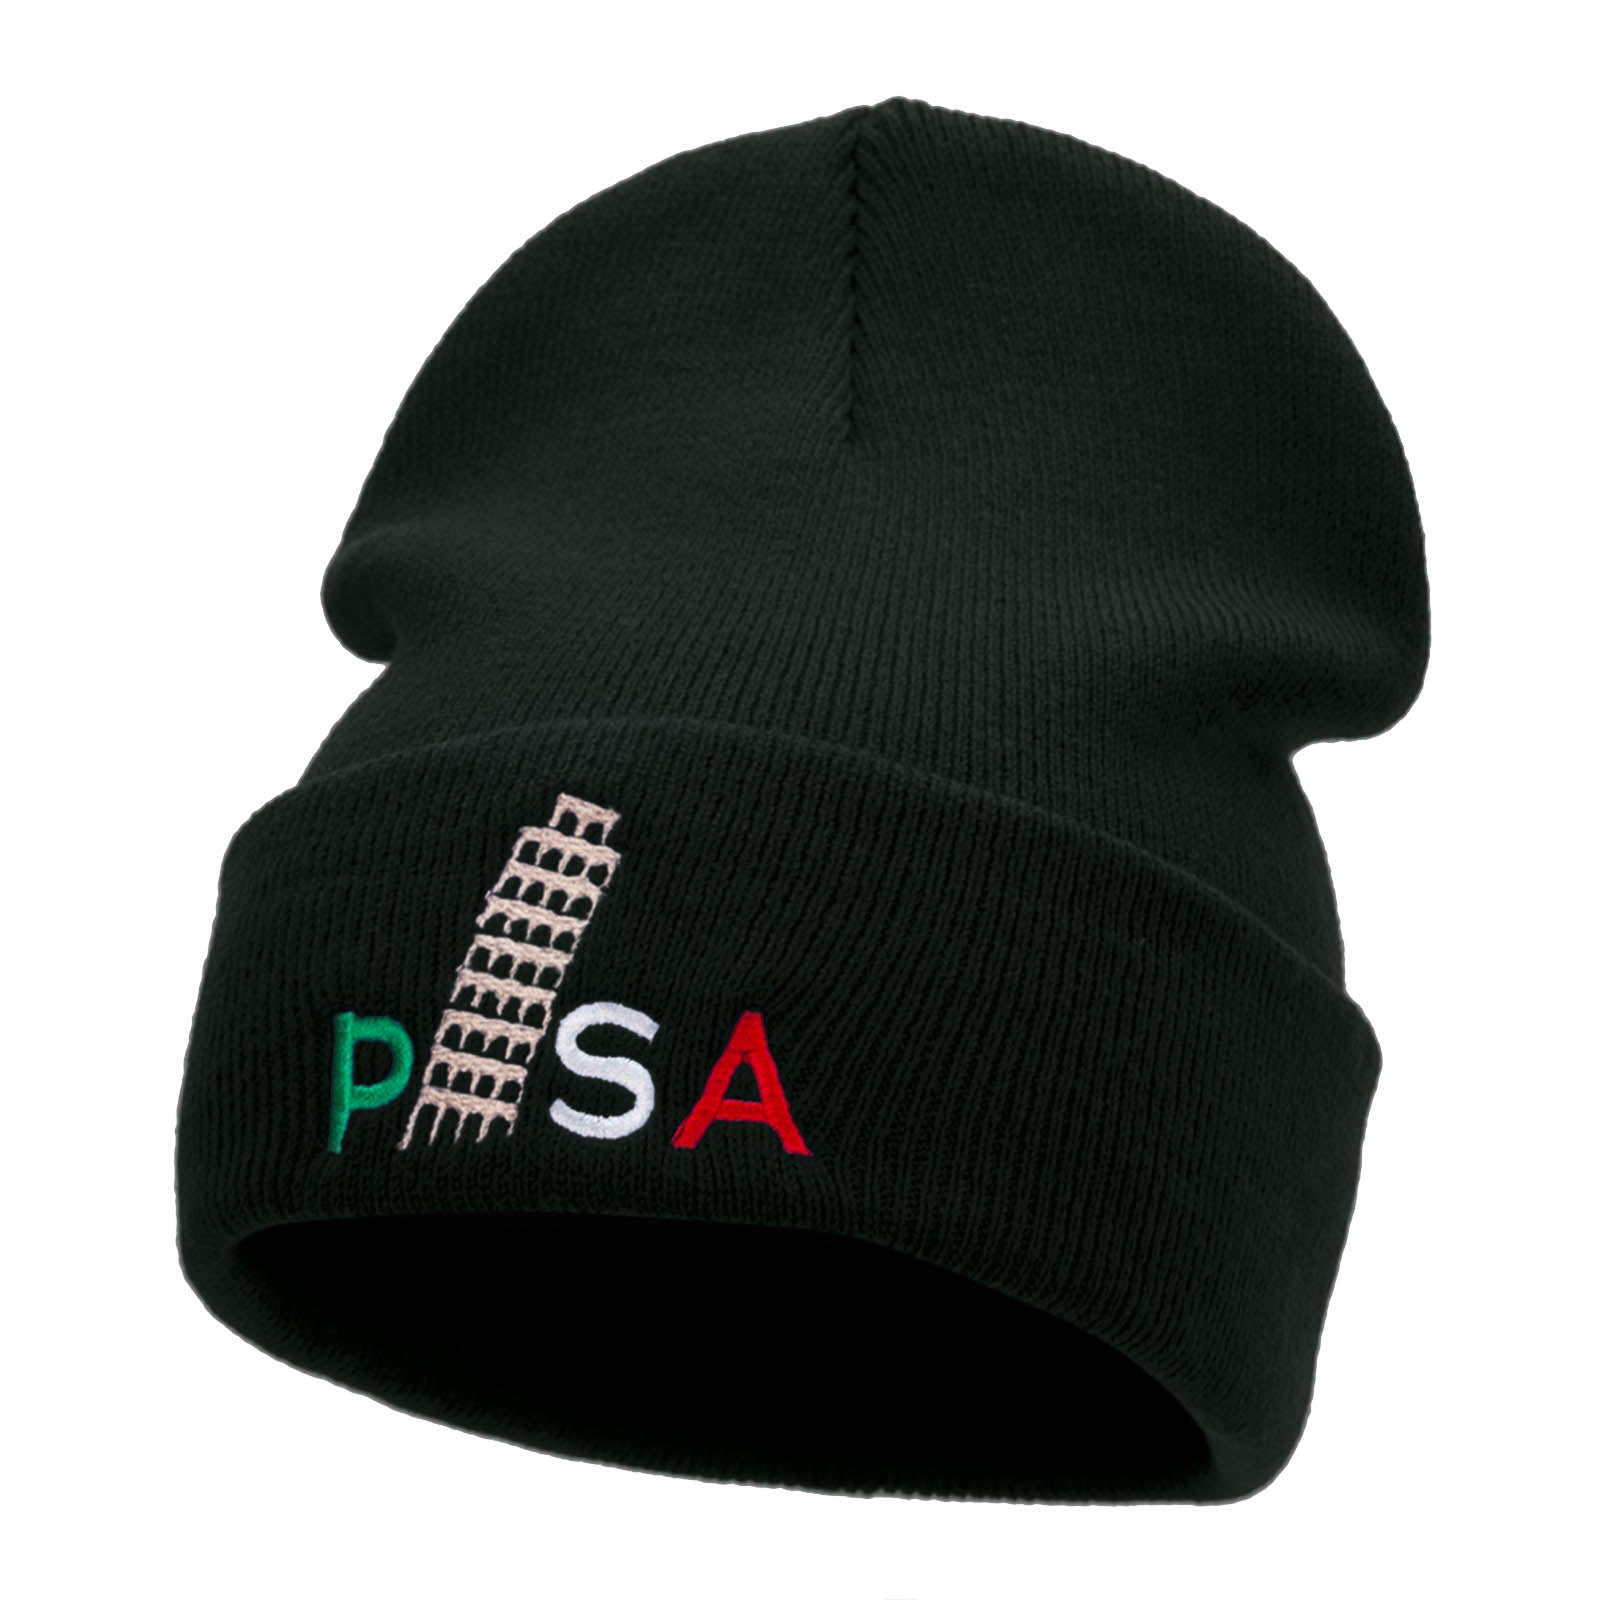 Pisa Embroidered 12 Inch Long Knitted Beanie - Black OSFM